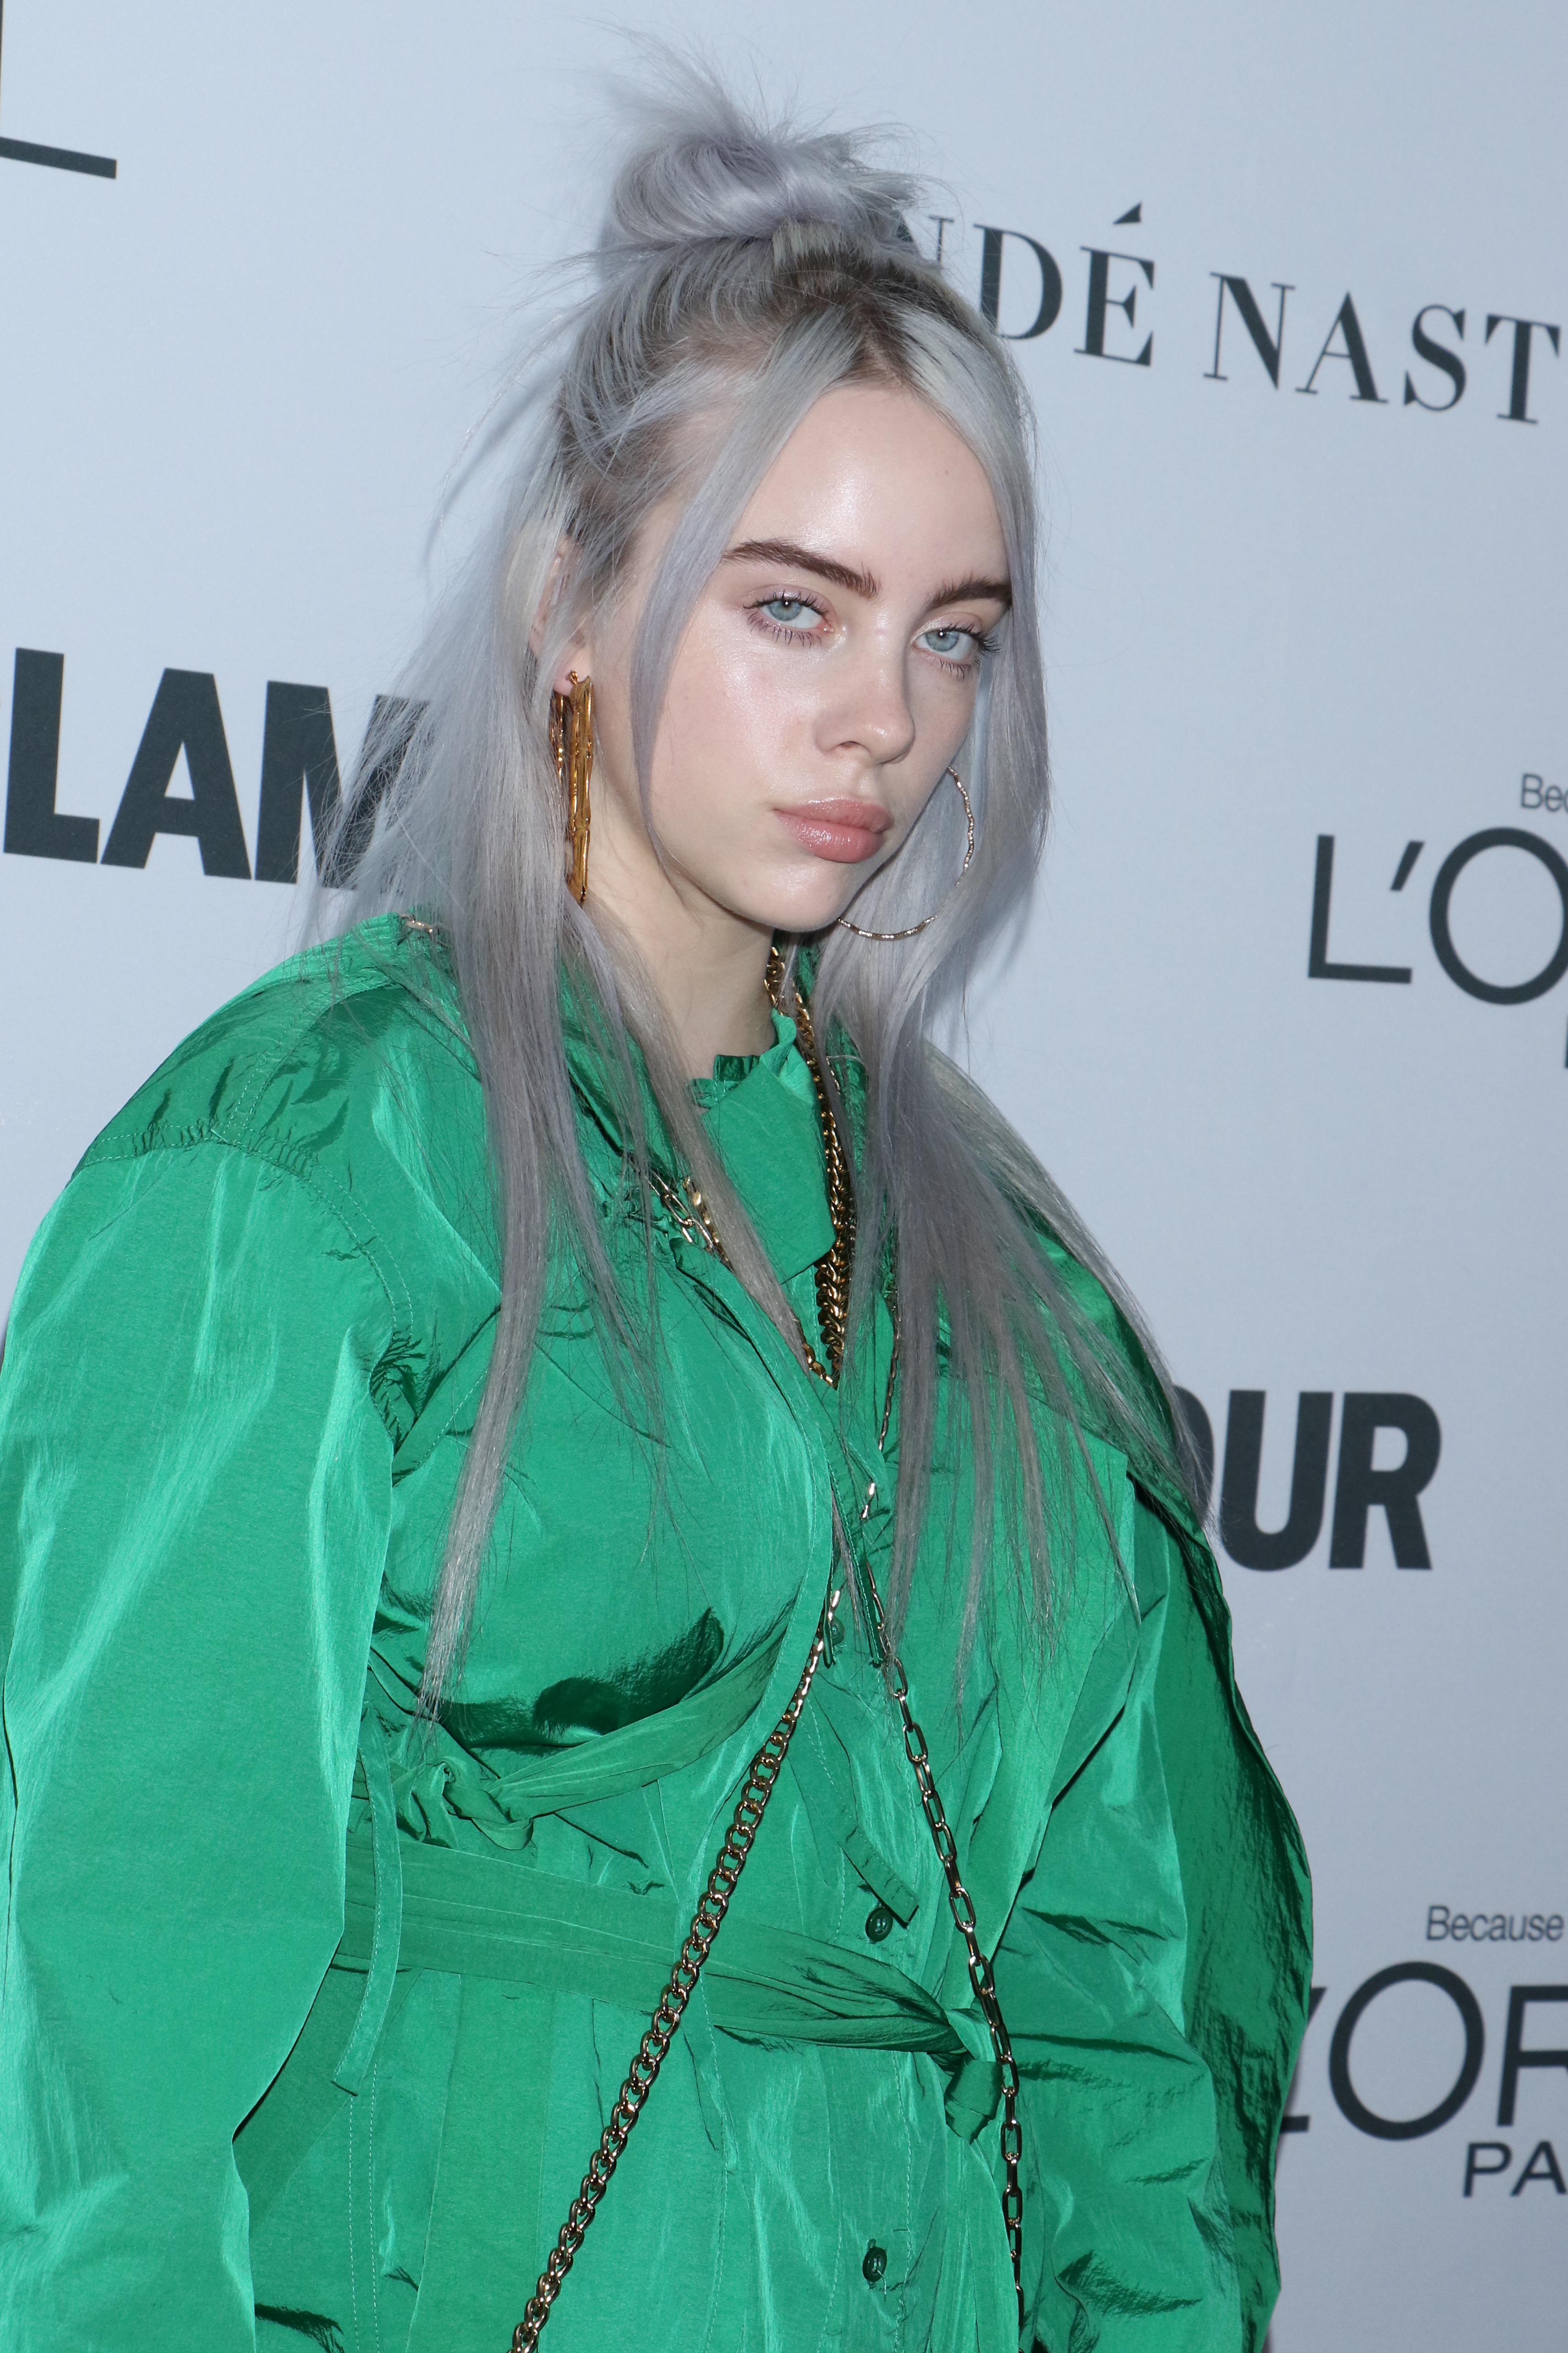 Billie Eilish's Hair Color Changes Over the Years: Photos